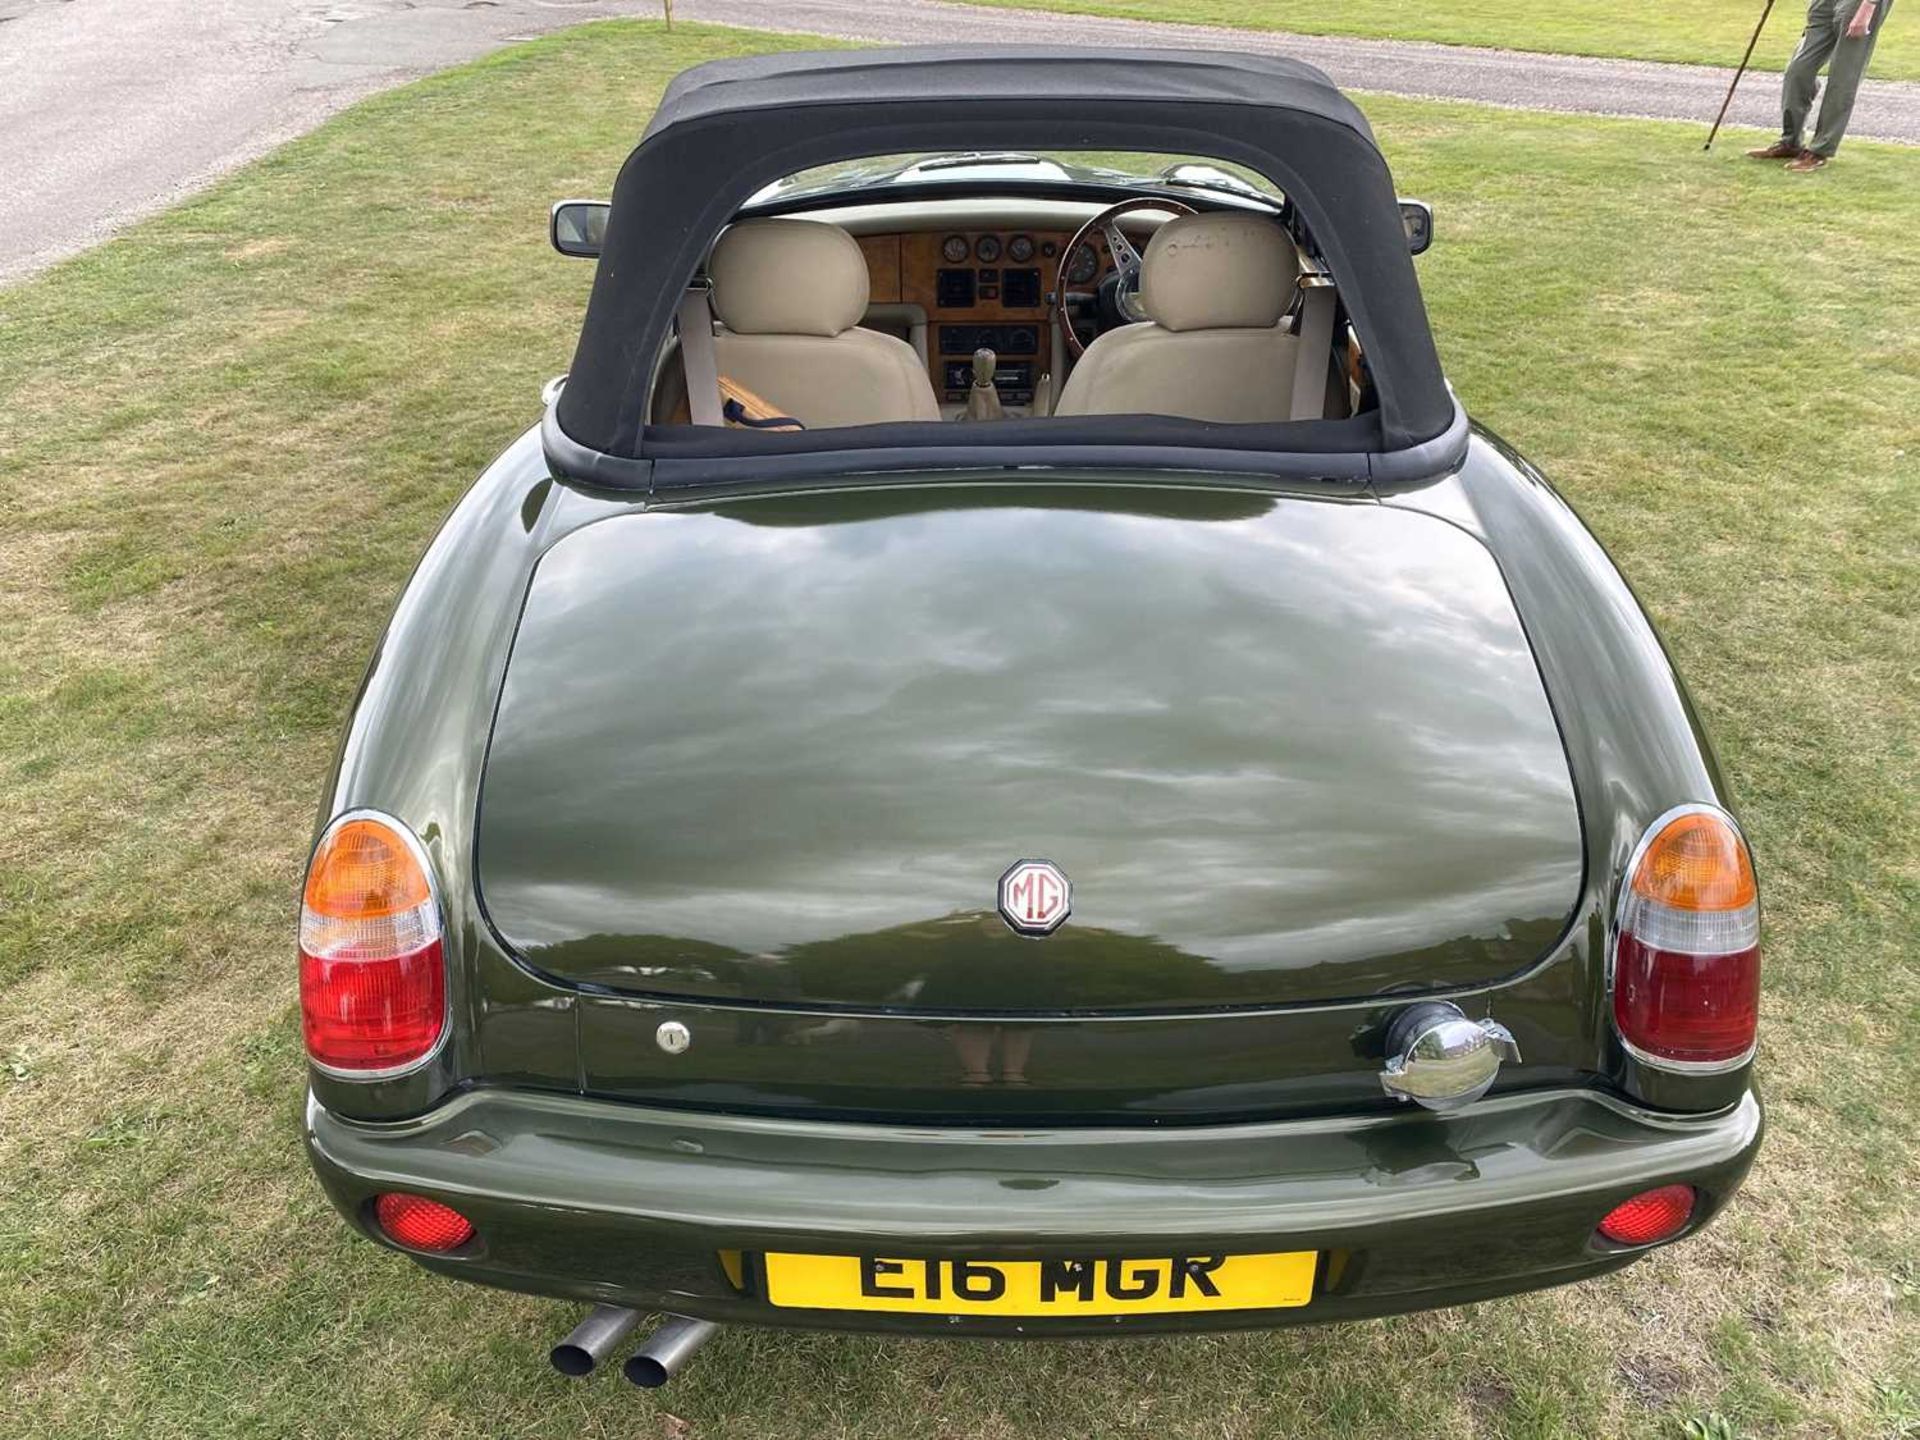 1995 MG RV8 A rare and sought-after car fitted with power steering - Image 15 of 45